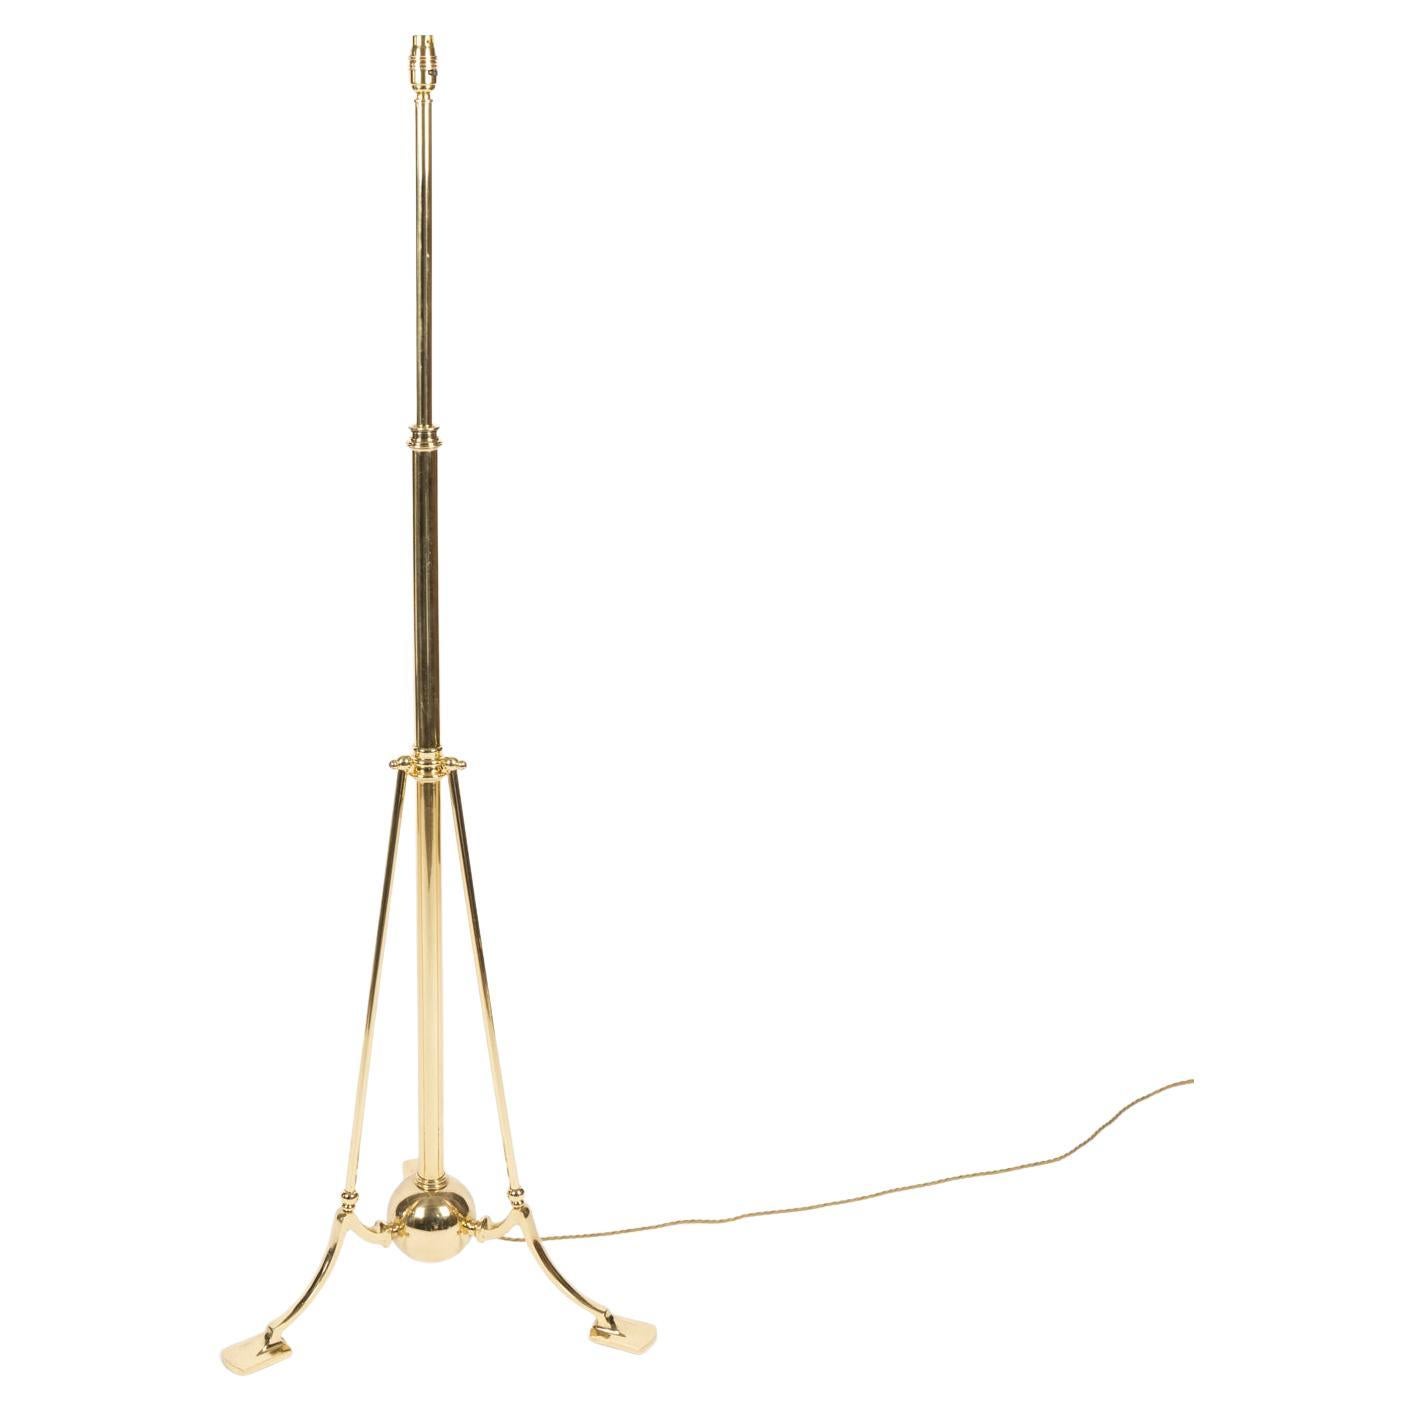 Brass Telescopic Standard Lamp in the Manner of Benson For Sale